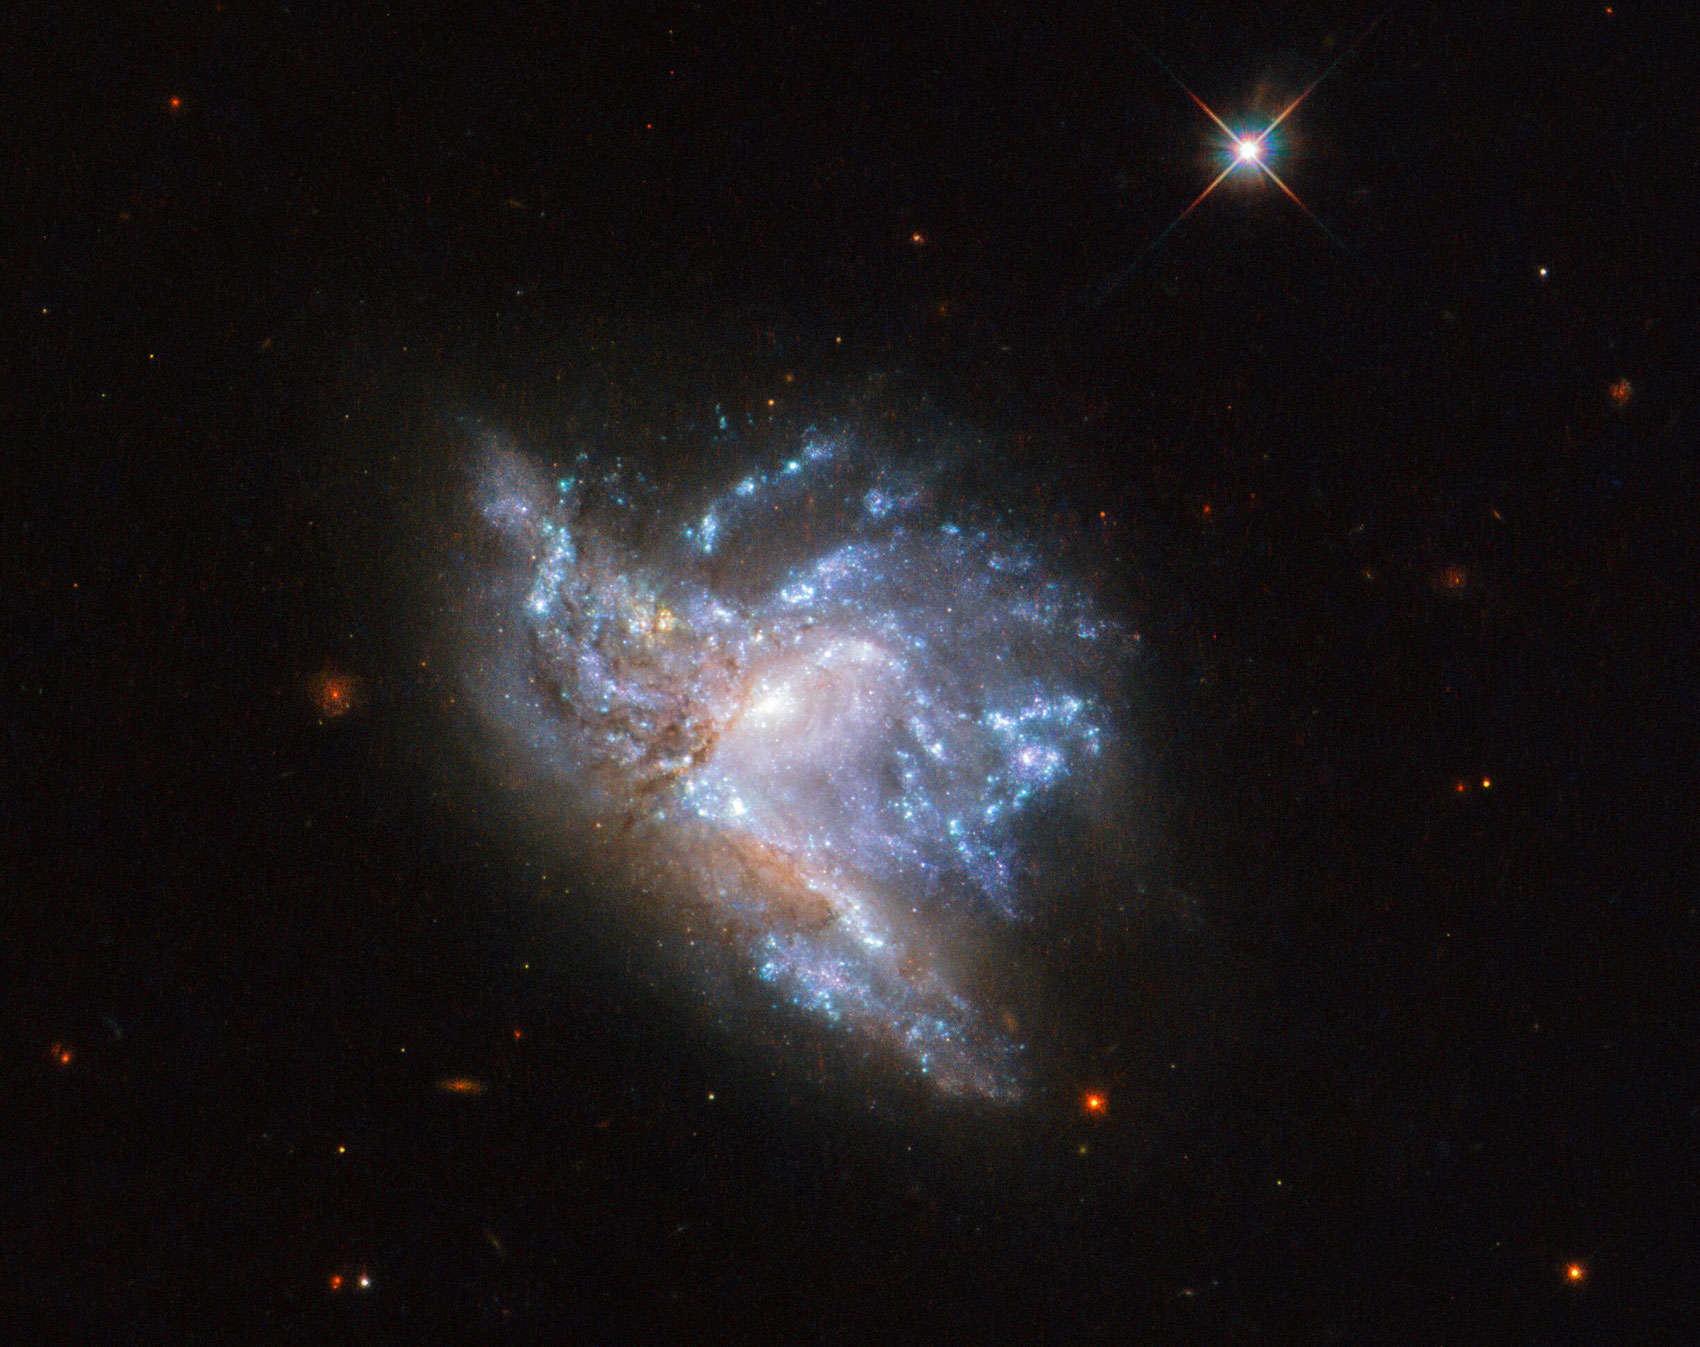 NGC 6052 is a pair of colliding spiral galaxies, part of a survey to look at star clusters that form in the aftermath. Credit: ESA/Hubble & NASA, A. Adamo et al.